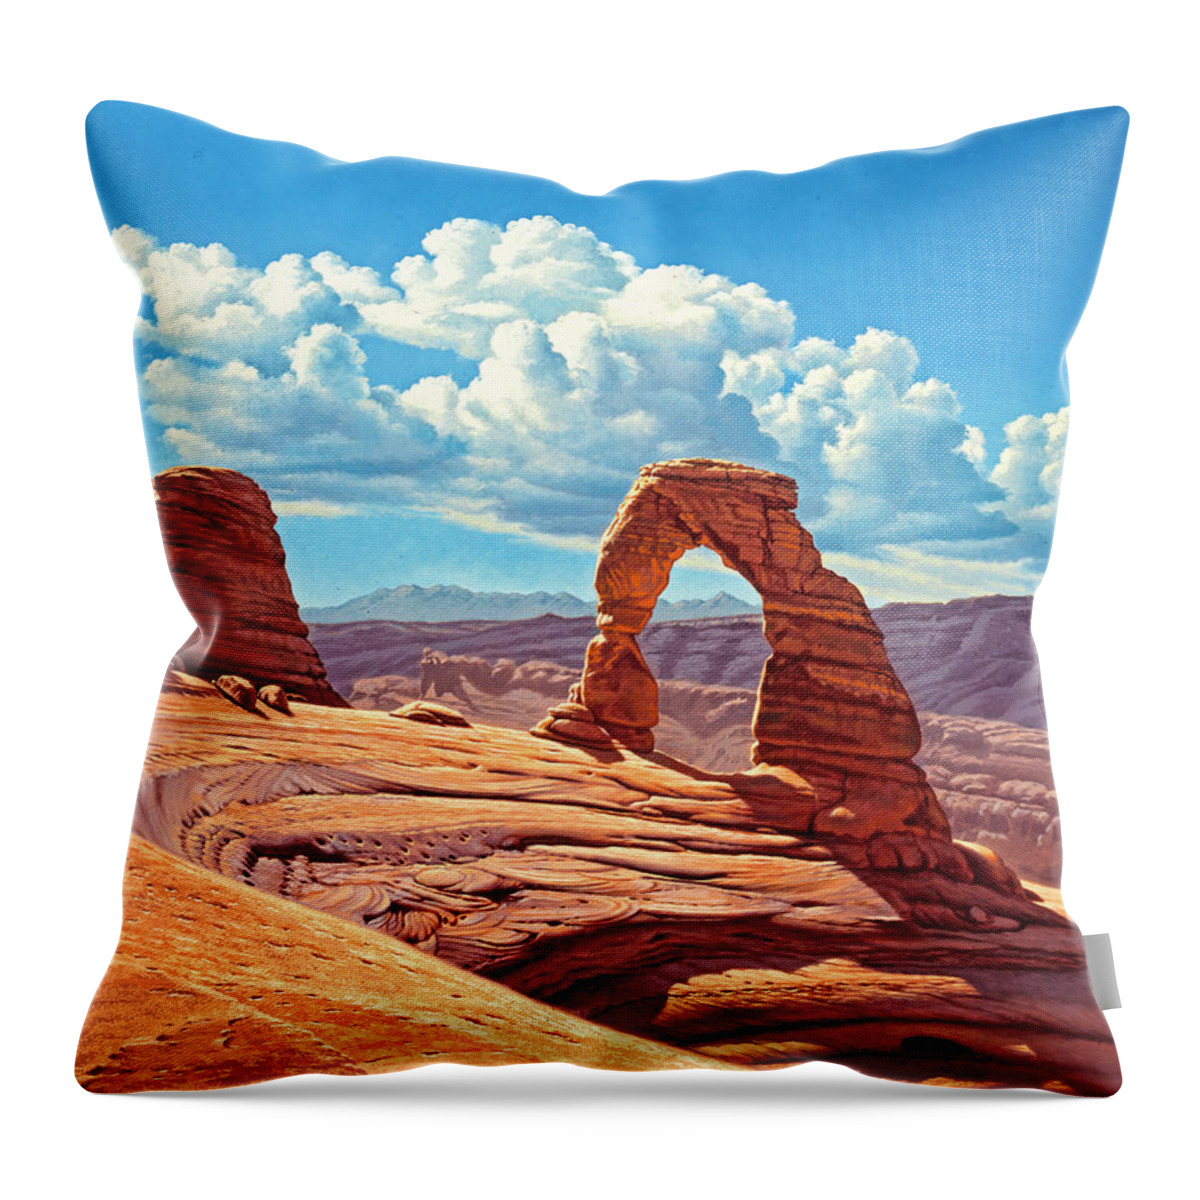 #faatoppicks Throw Pillow featuring the painting Delicate Arch by Paul Krapf